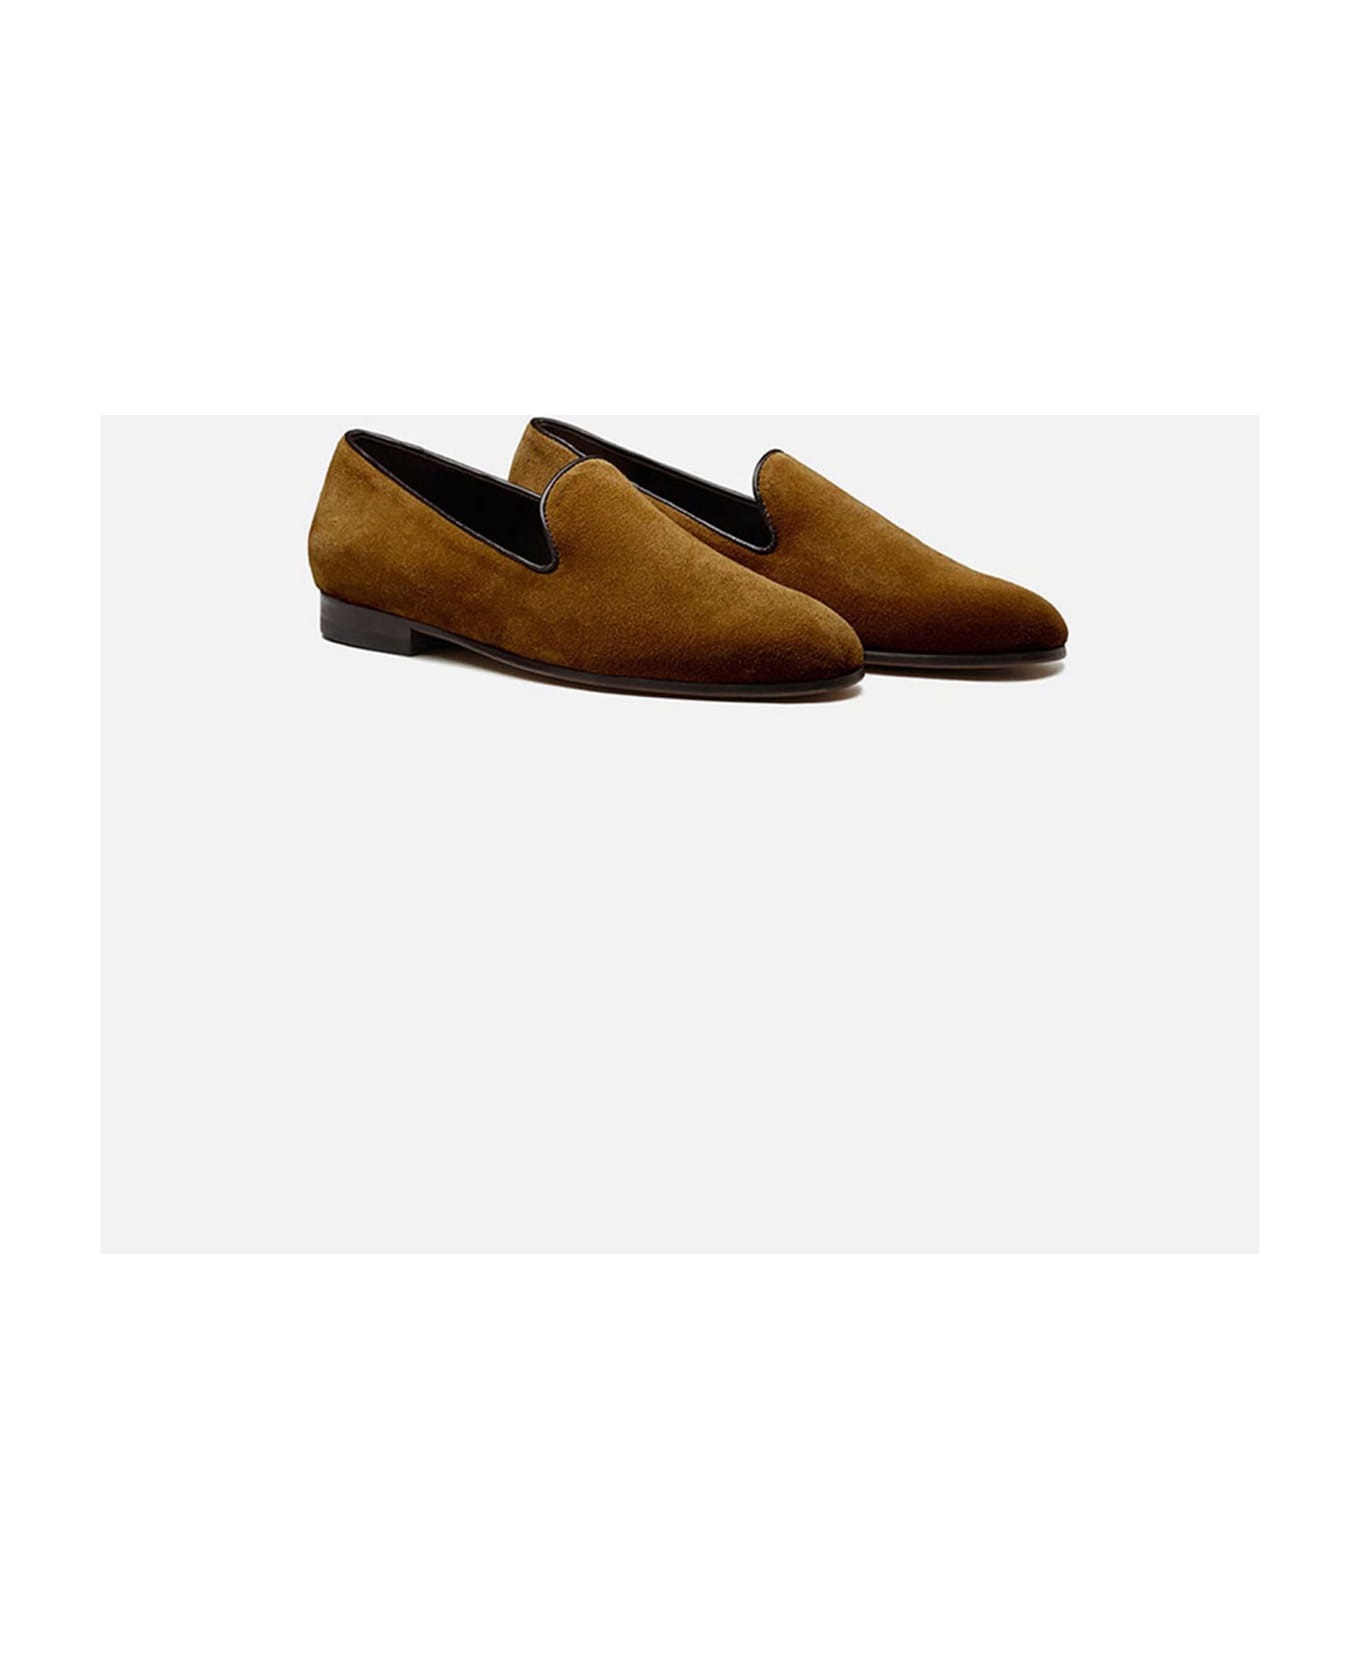 CB Made in Italy Suede Slip-on Positano - Tobacco